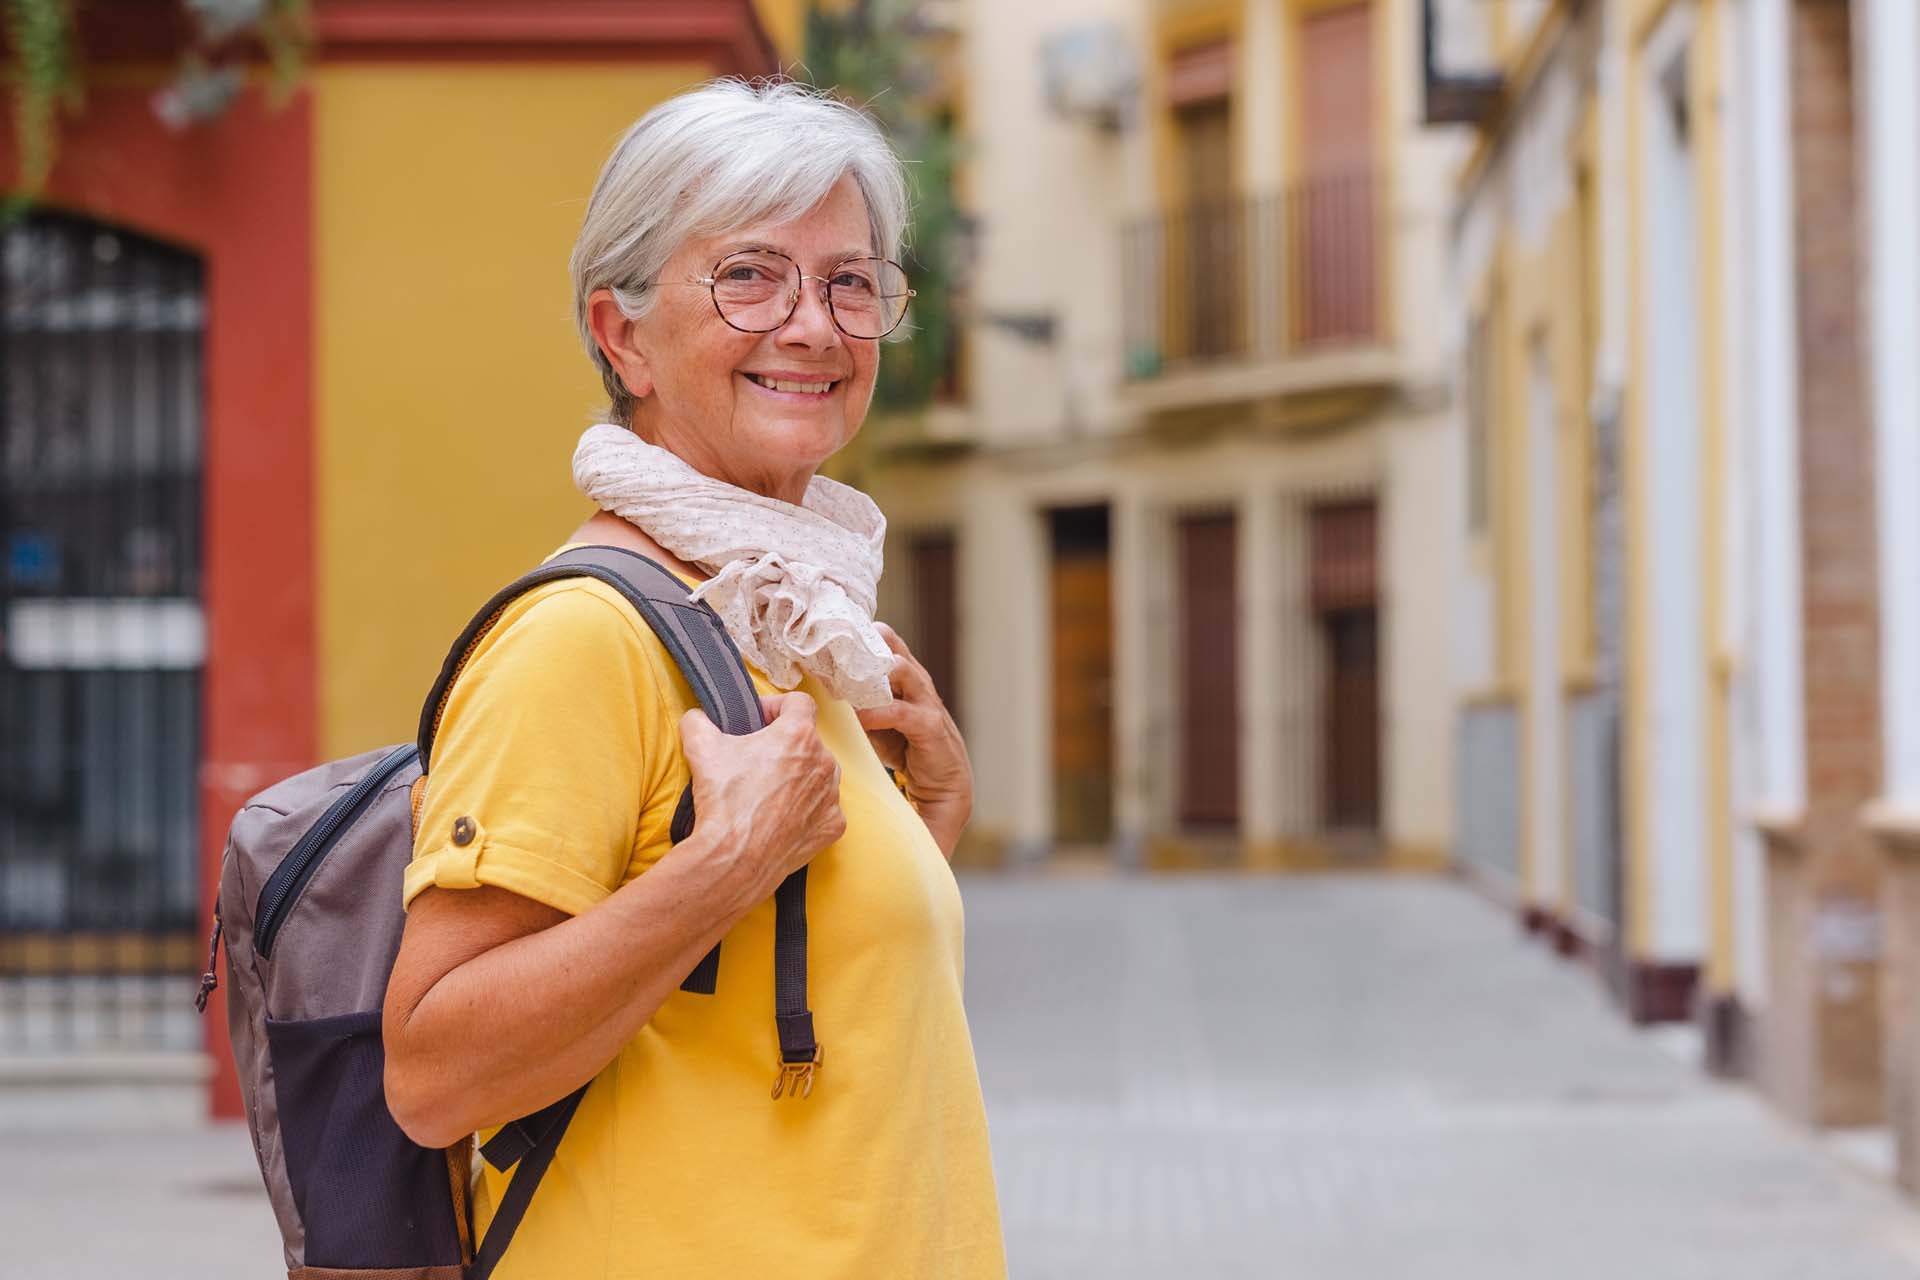 An older traveller smiles at the camera during her holiday